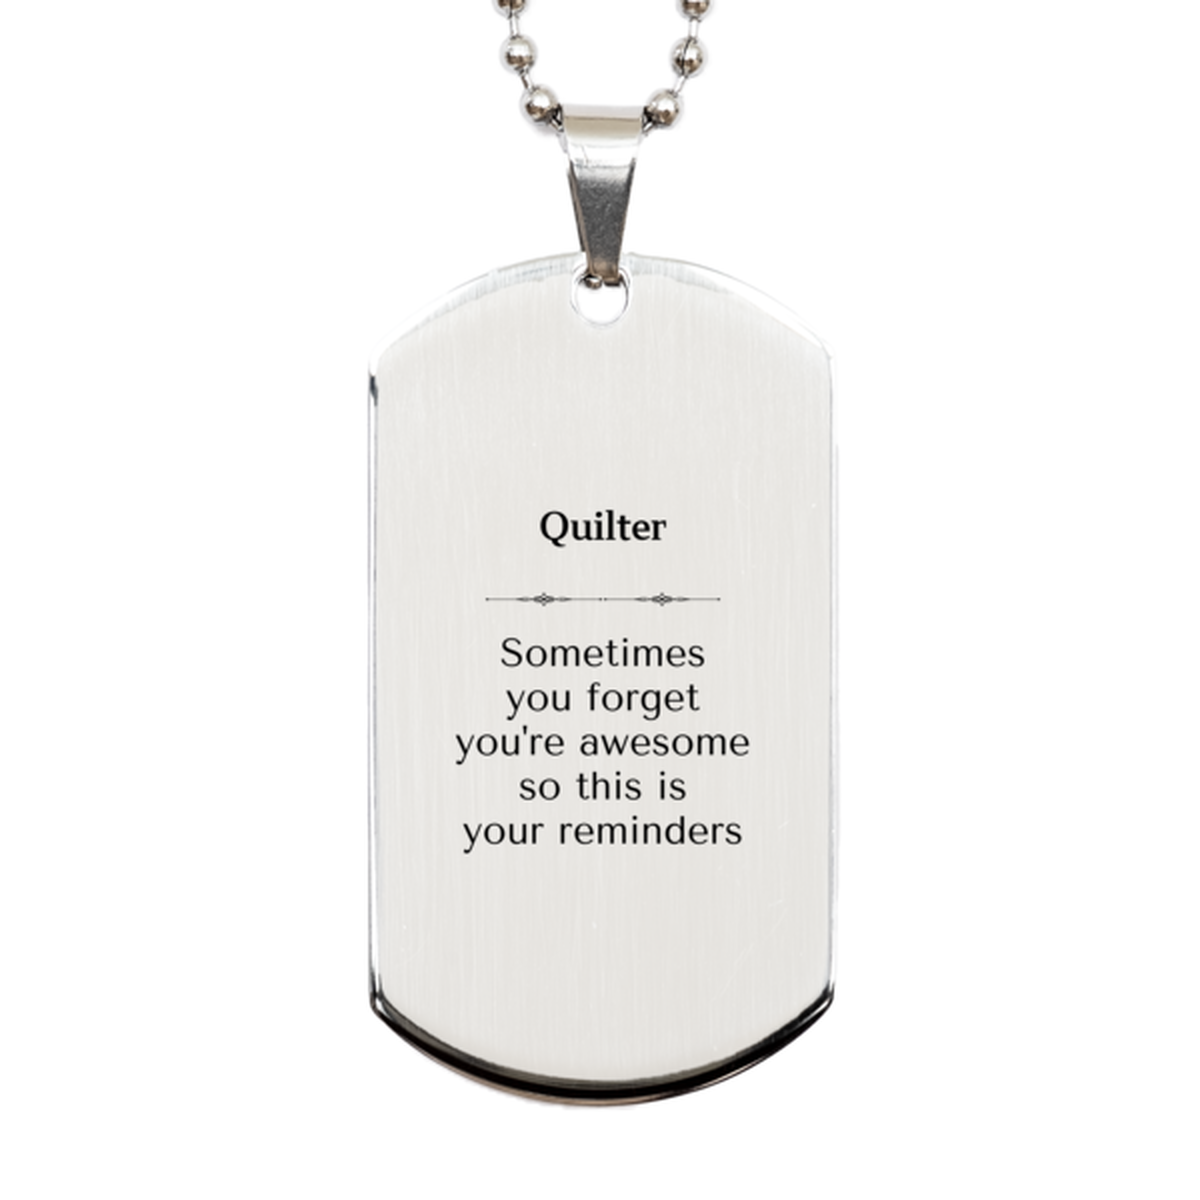 Sentimental Quilter Silver Dog Tag, Quilter Sometimes you forget you're awesome so this is your reminders, Graduation Christmas Birthday Gifts for Quilter, Men, Women, Coworkers